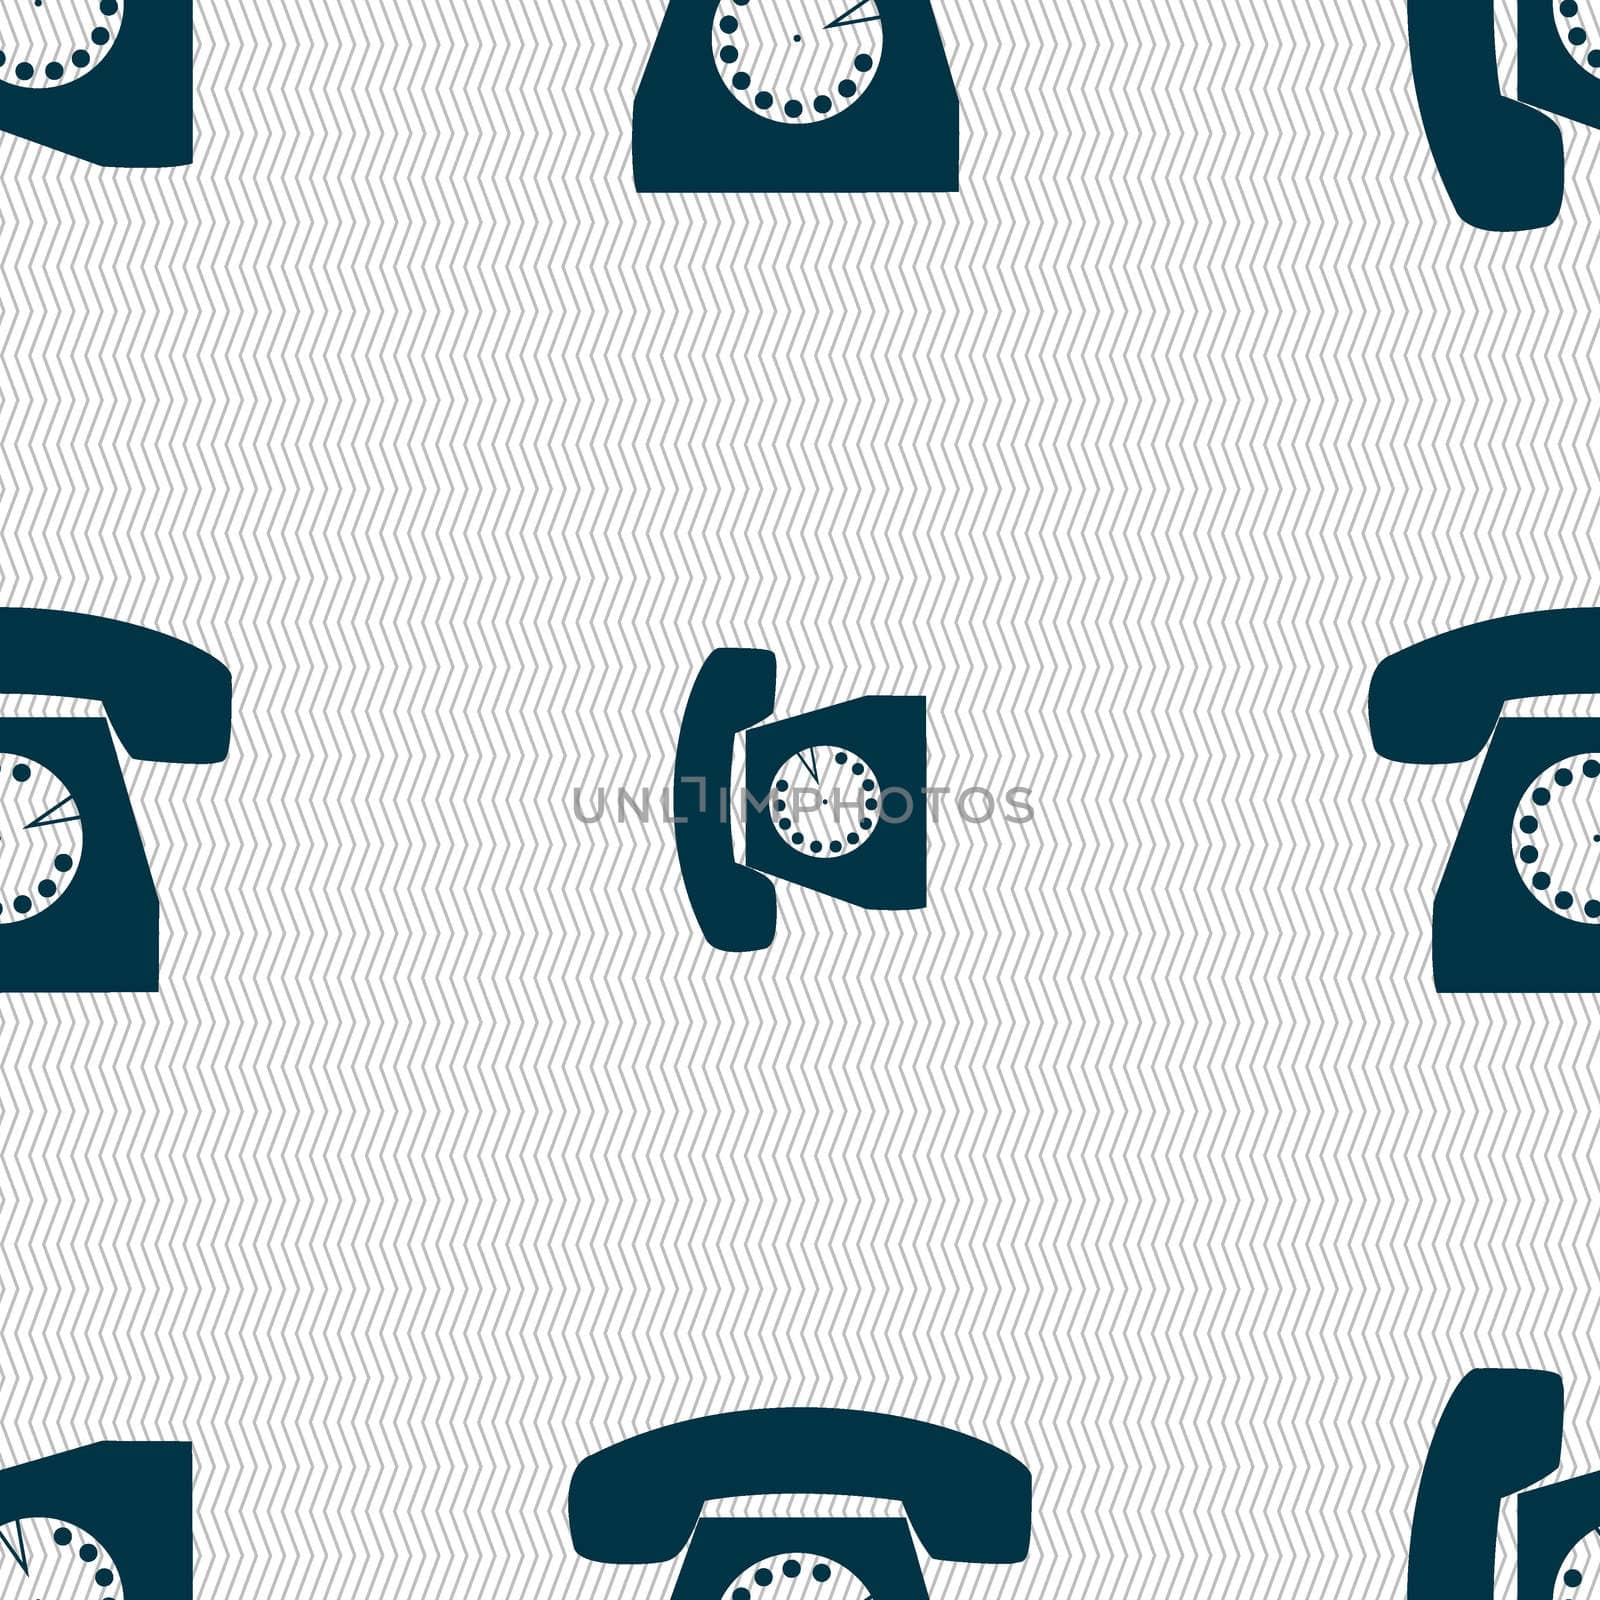 Retro telephone icon symbol. Seamless abstract background with geometric shapes. illustration